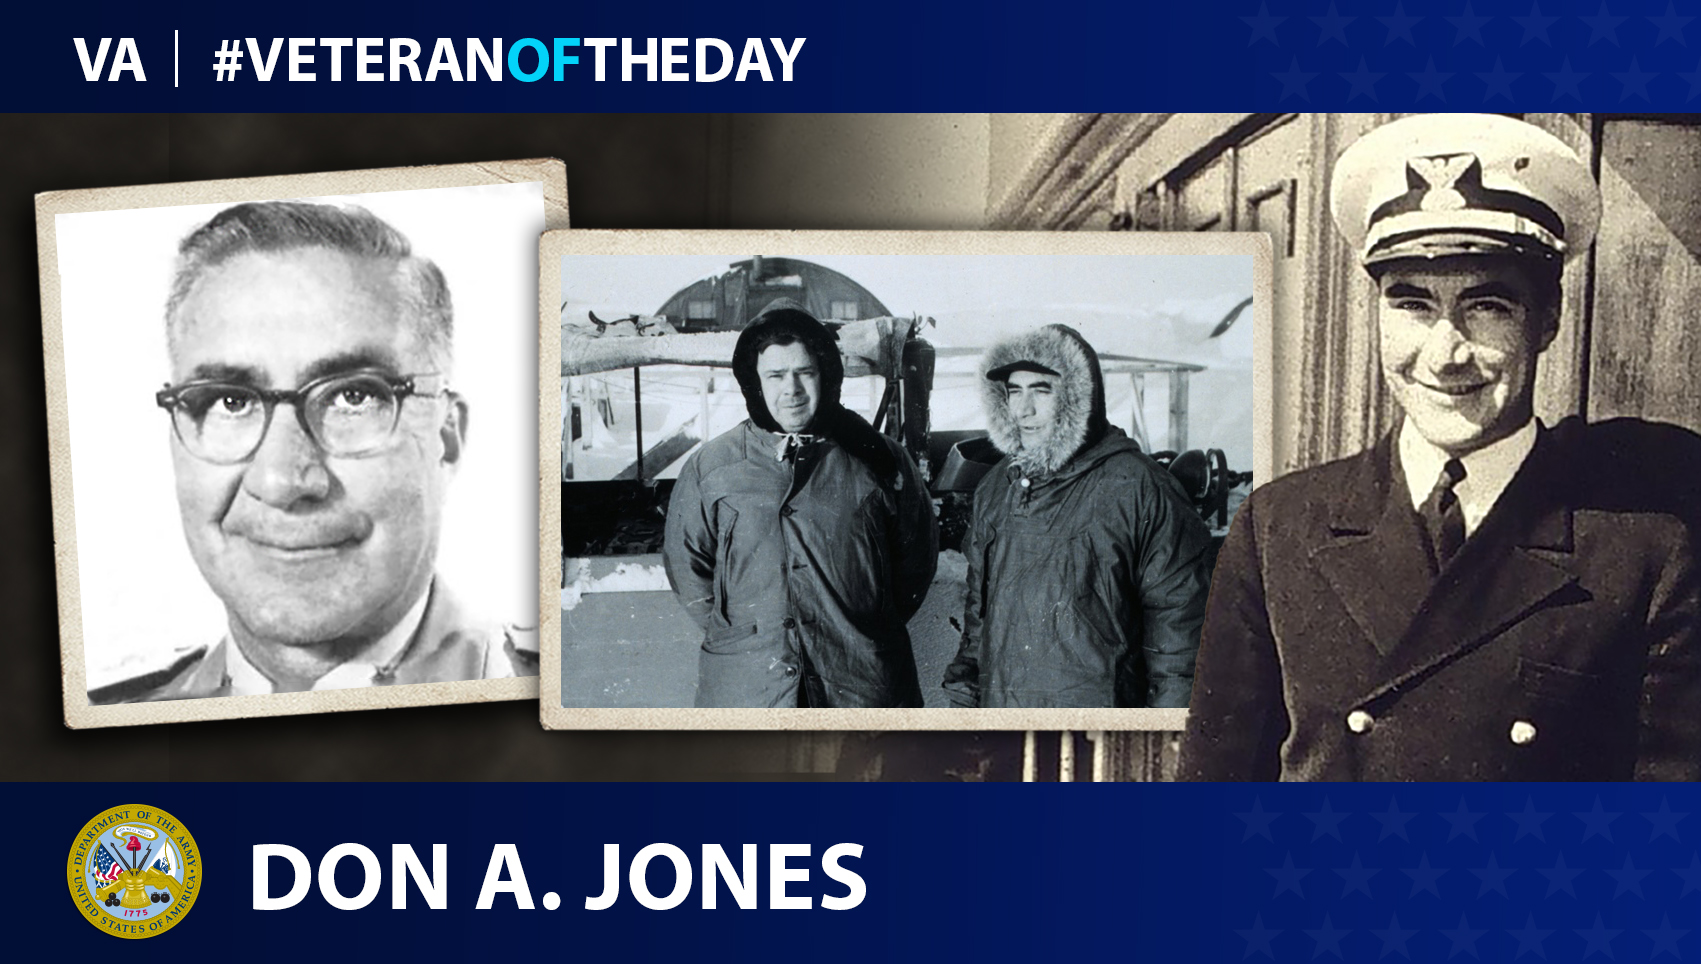 Coast and Geodetic Survey Corps Veteran Don A. Jones is today’s Veteran of the Day.